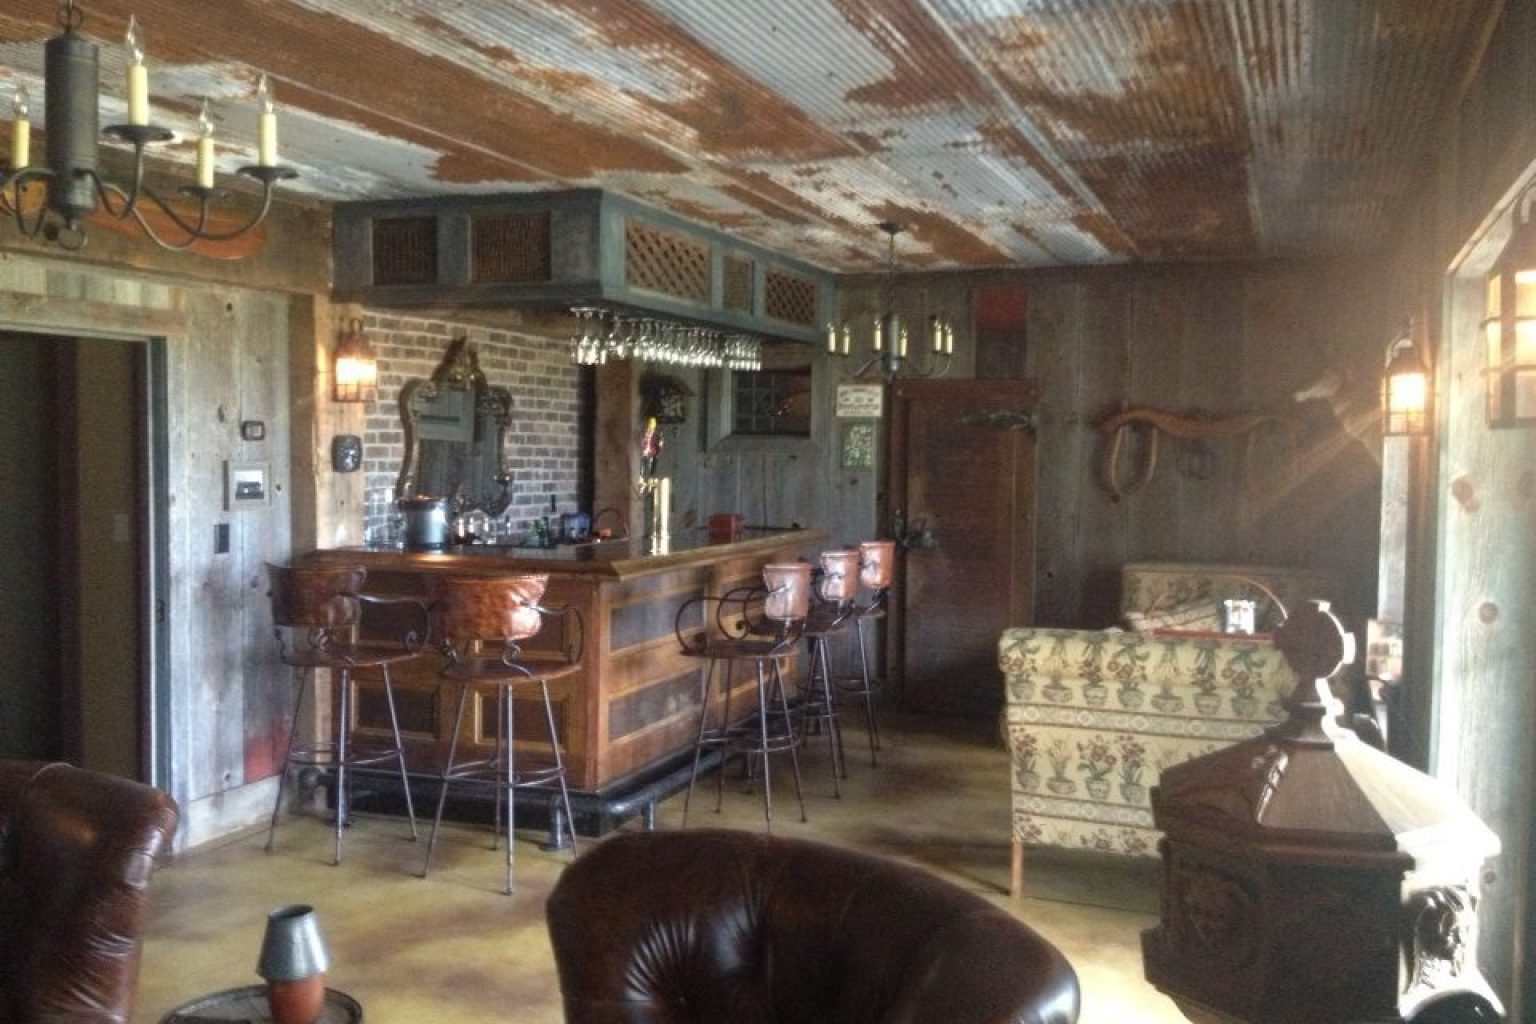 DIY Bar Made From Old Barn Scraps Is The Ultimate Man Cave (PHOTO)